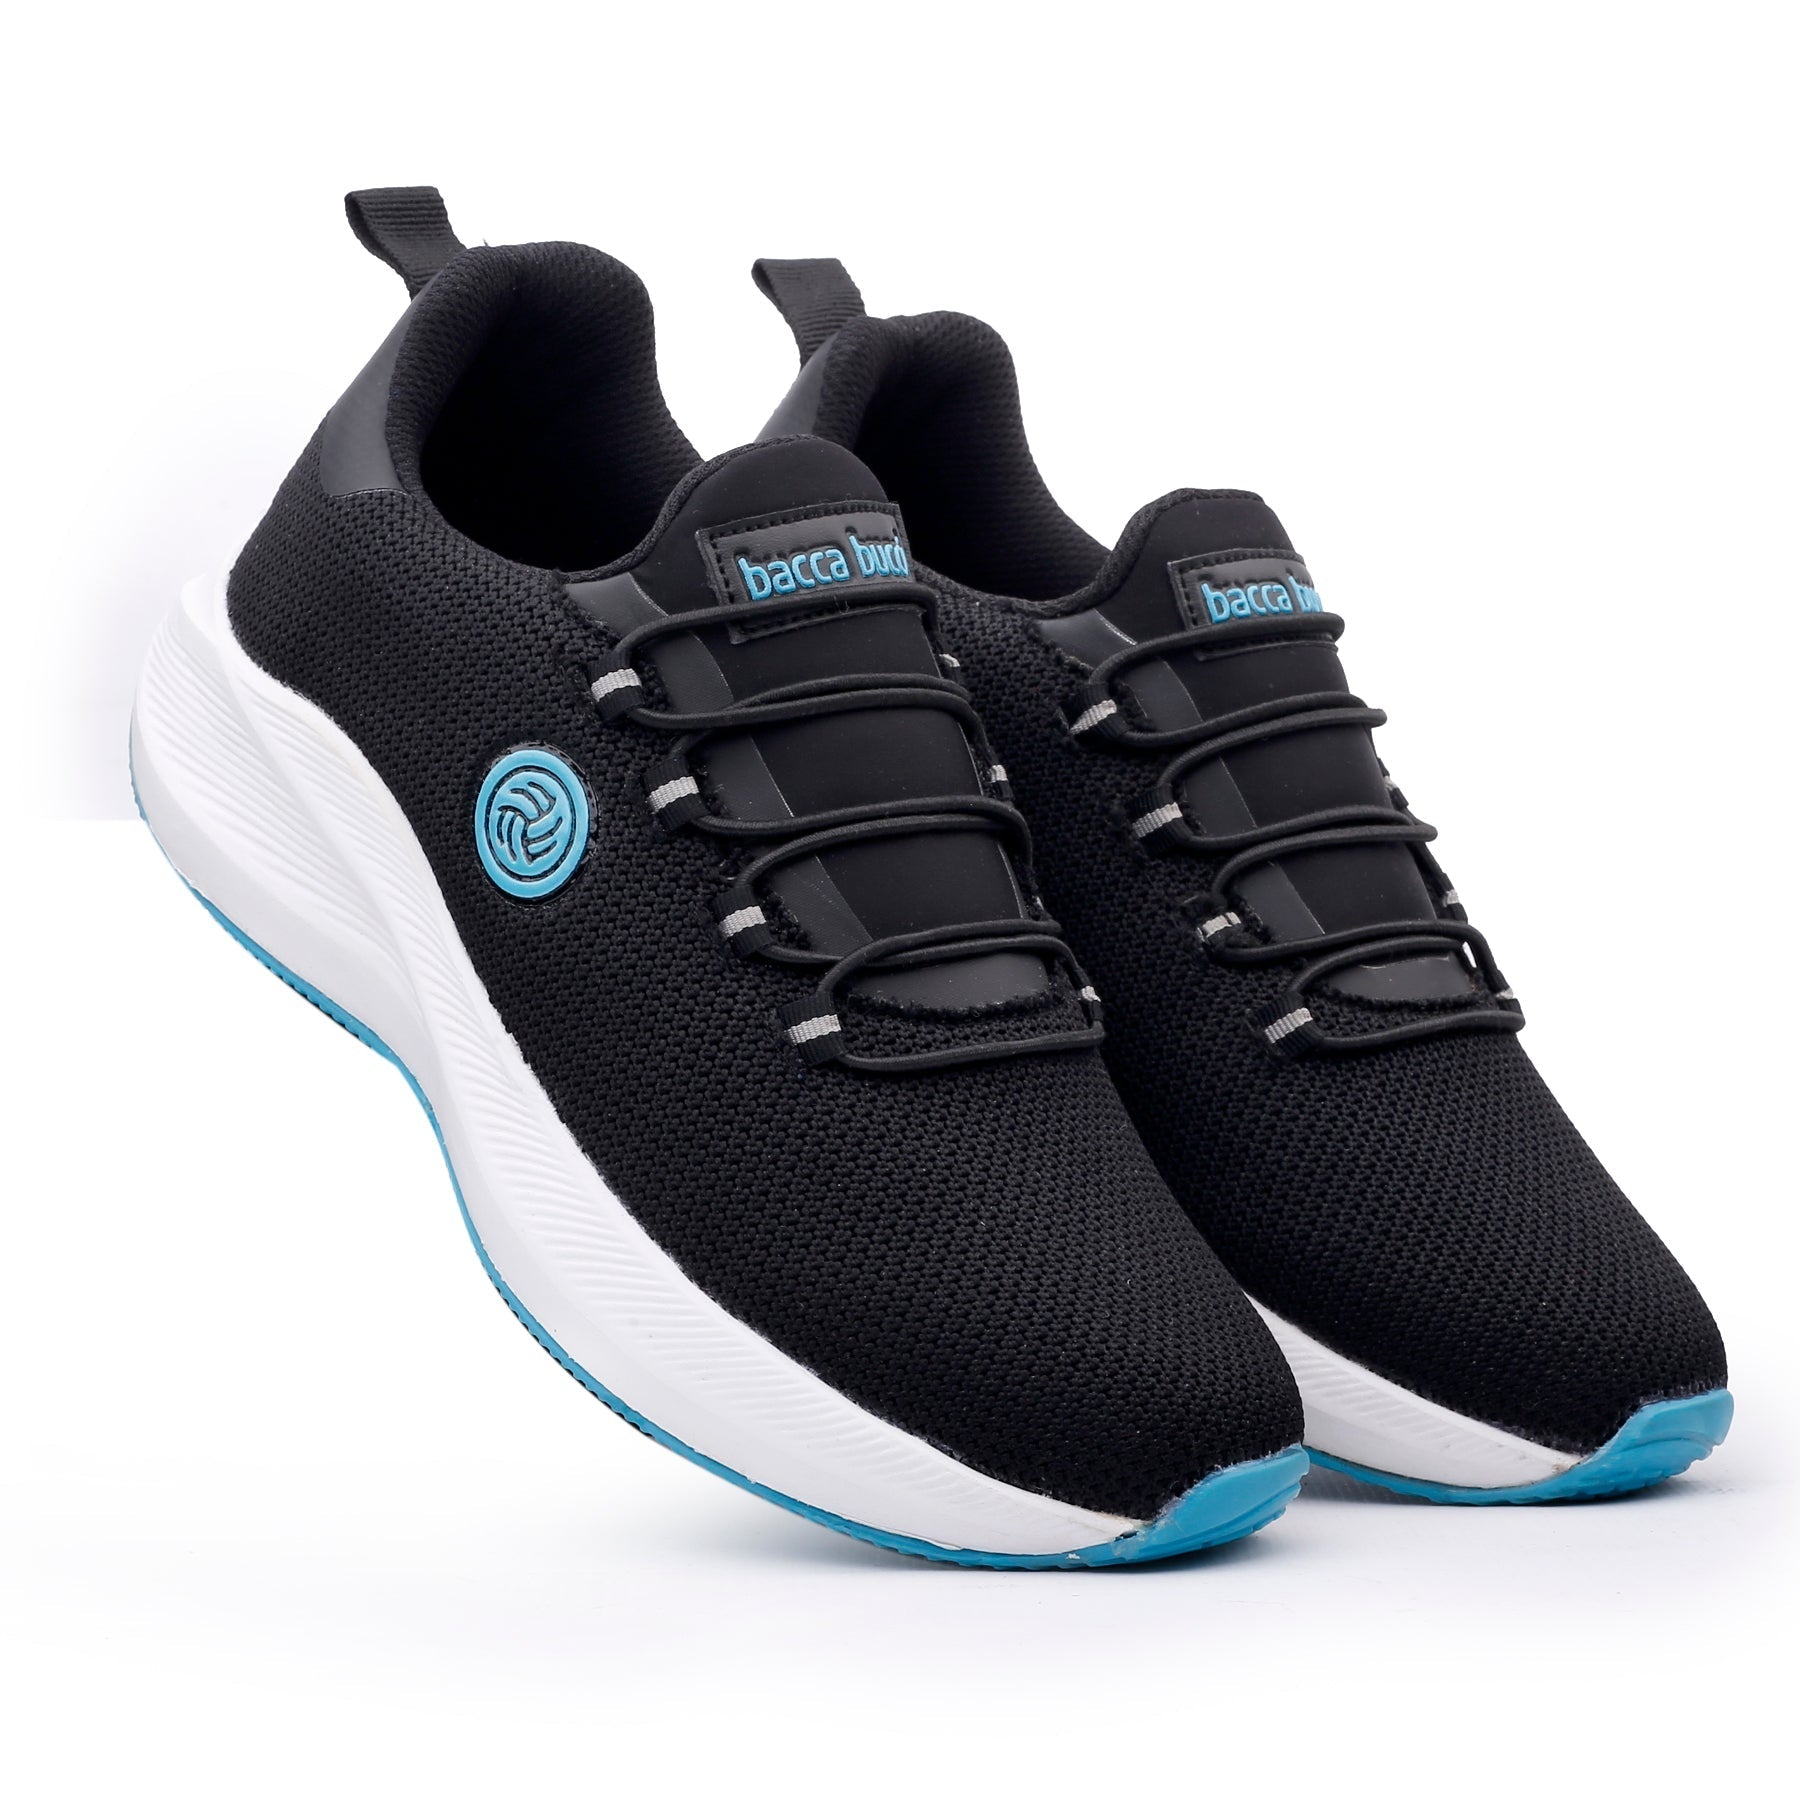 Bacca Bucci Women SAVAGE Running Shoes/Sneakers for Running/Gym/Training/Casual Walking